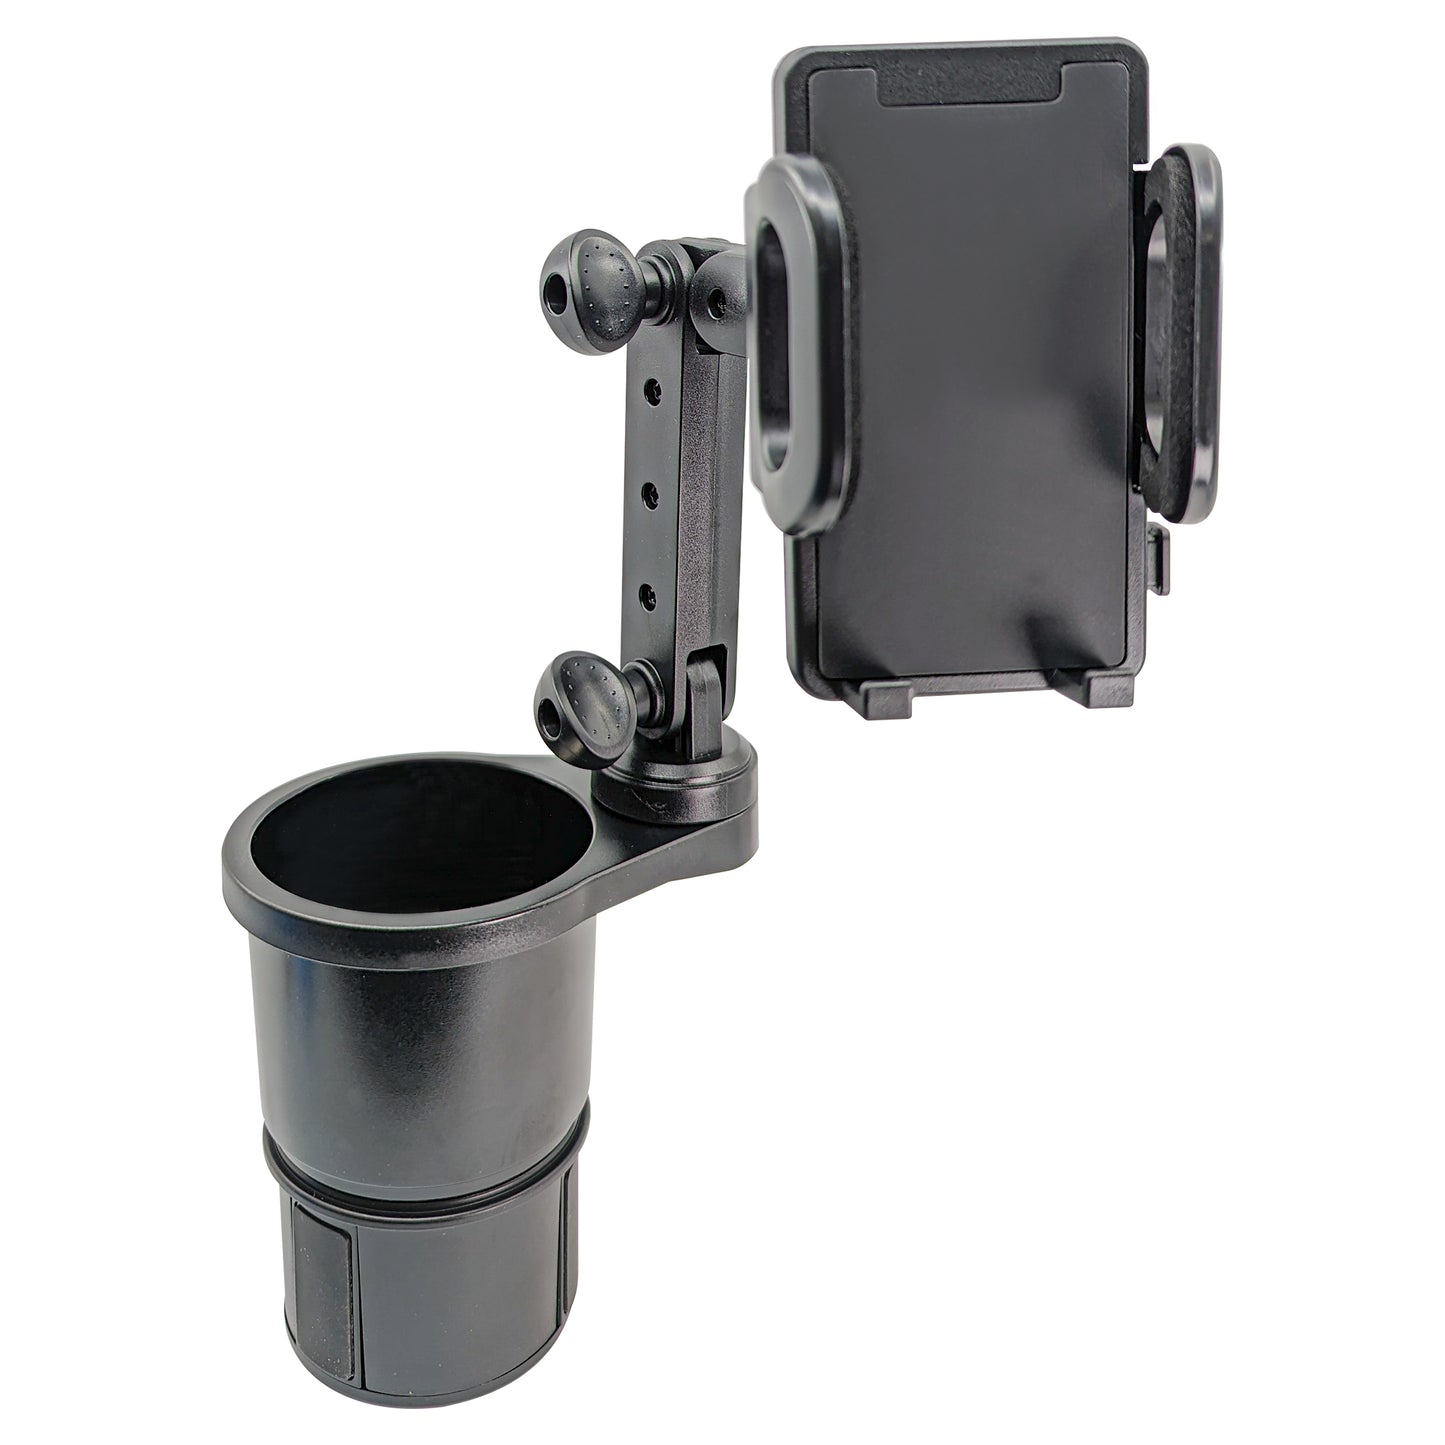 Cup Holder With Phone Holder; Adjustable Base To Fit Most Cars